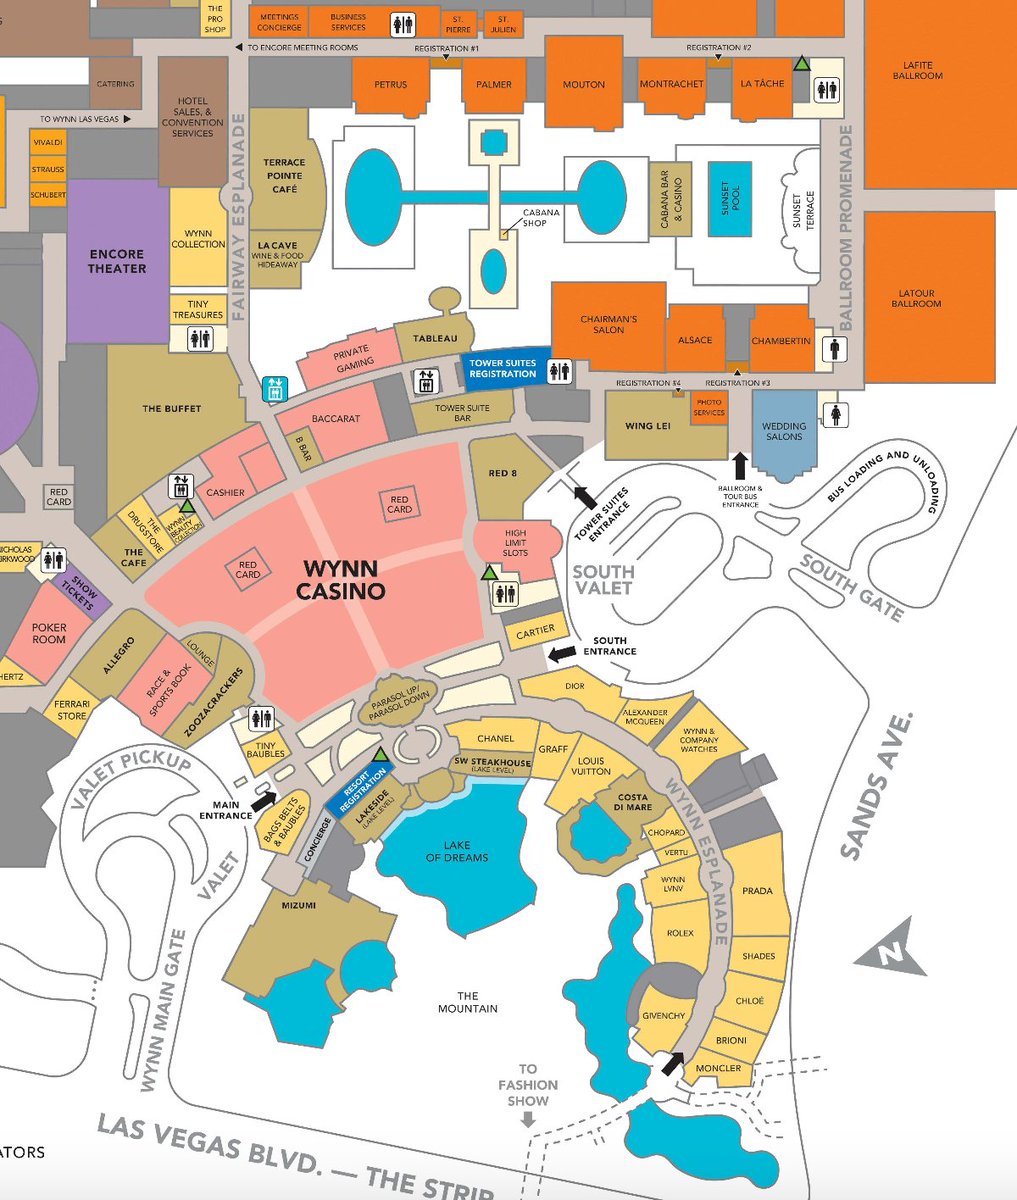 magentogirl: Here is the map for the Wynn at #MagentoImagine. Good luck with that. I will be providing an annotated map soon. https://t.co/Rusv5FvXw9